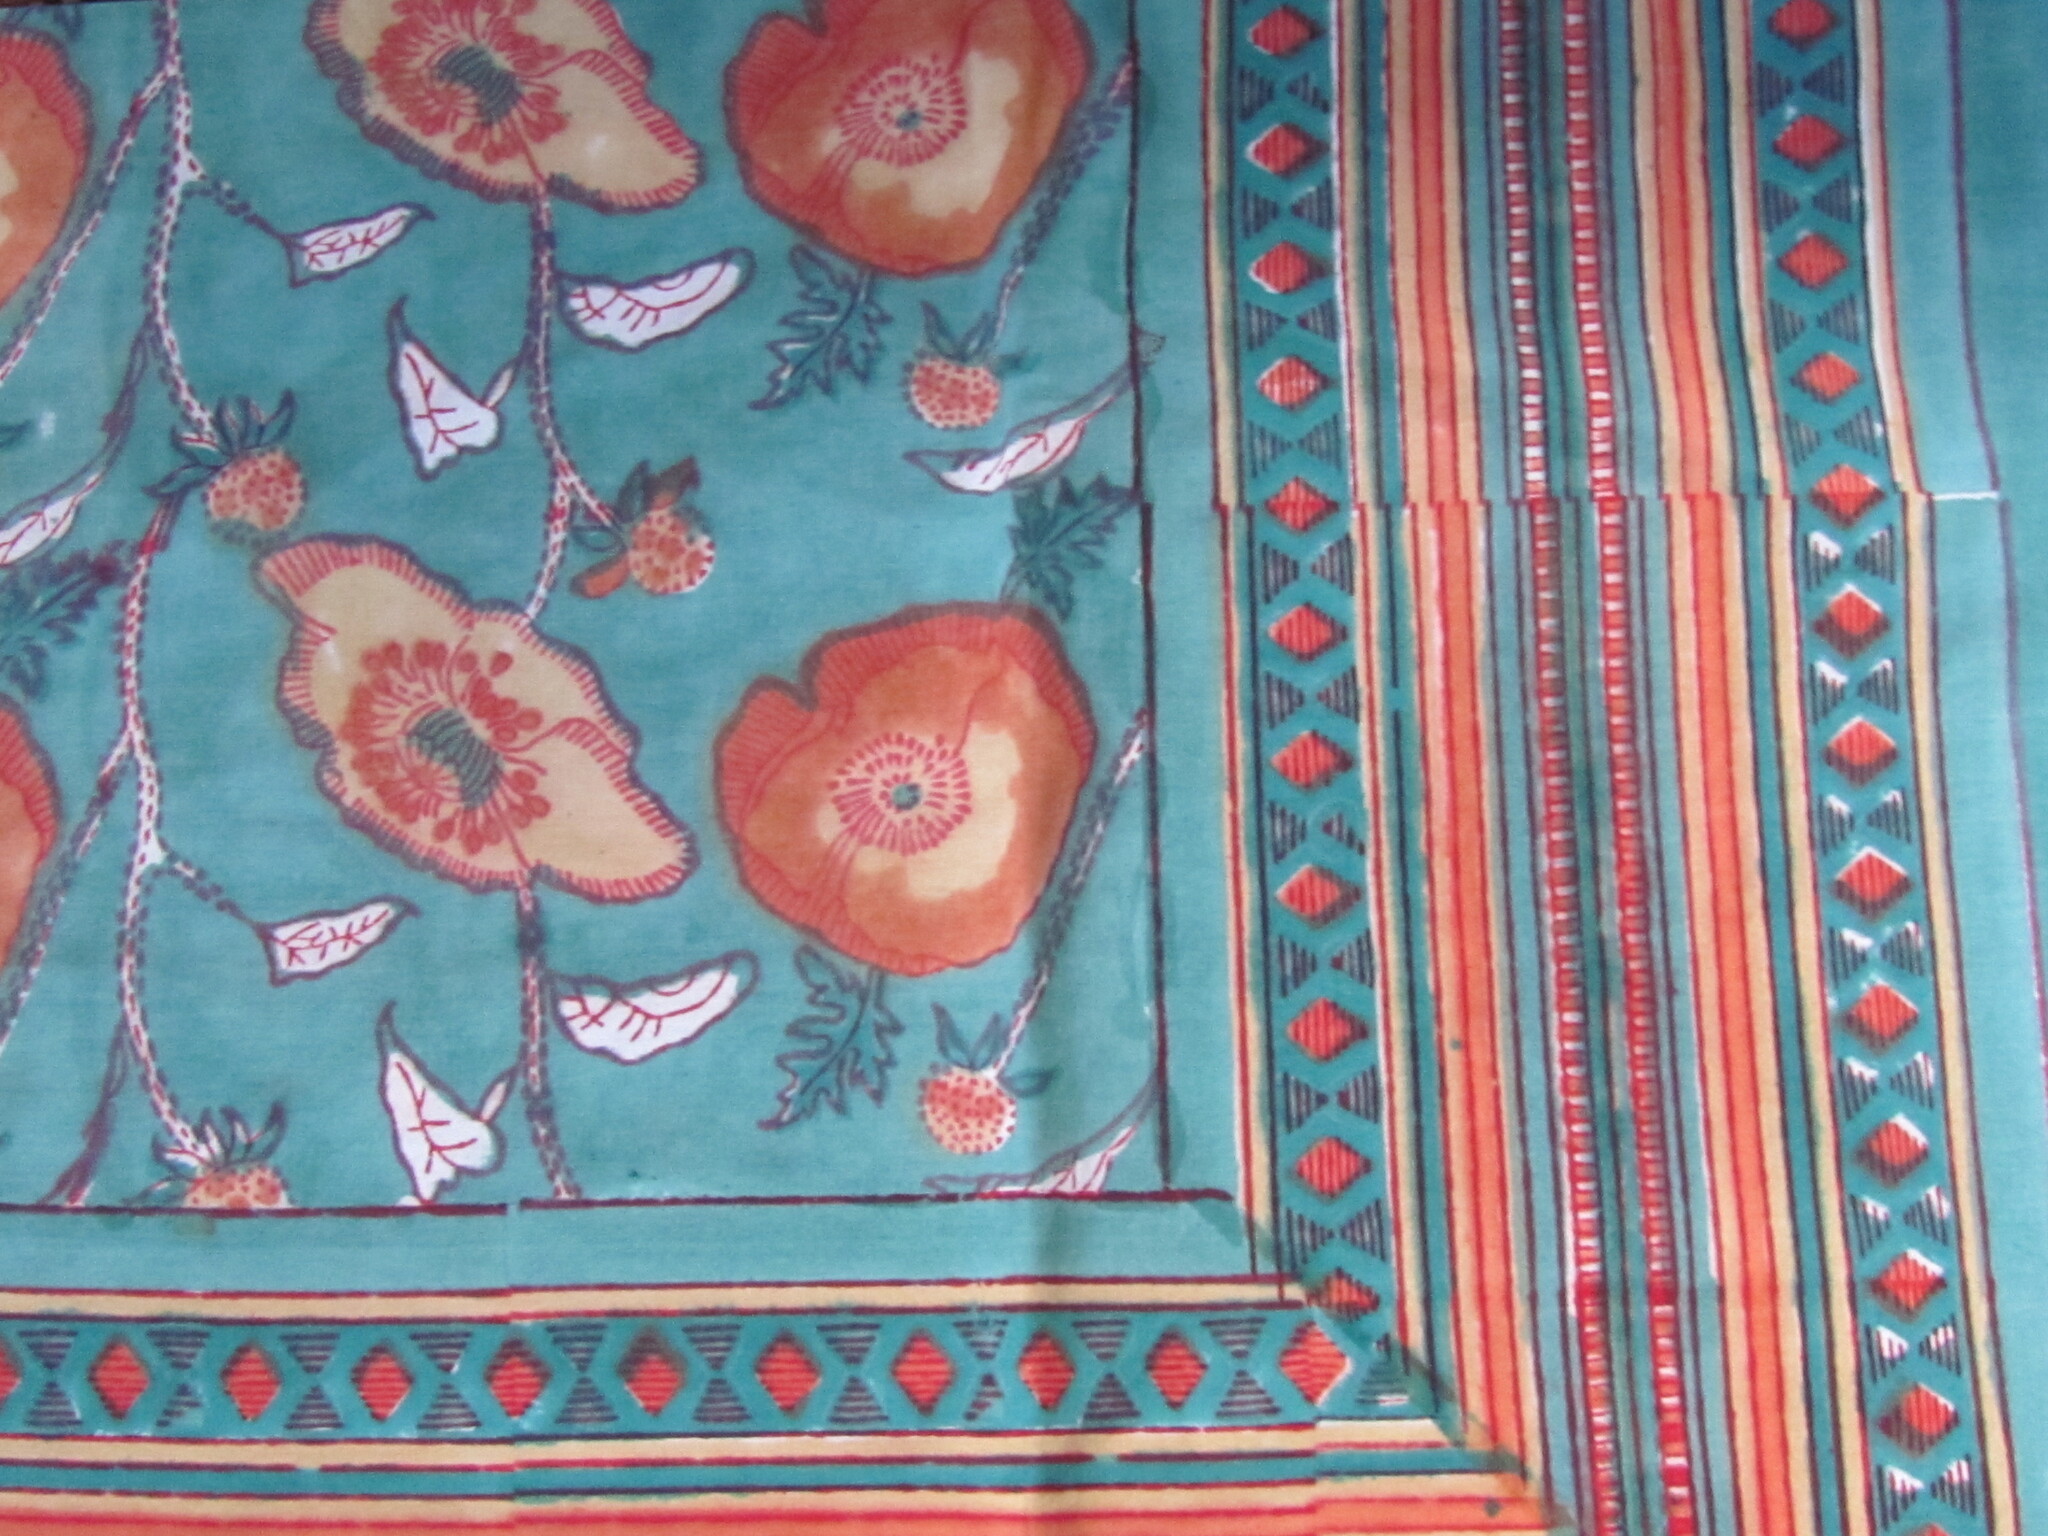 Bedsheet bohemian bed, grand foulard, bed spread natural dyes and hand printed,